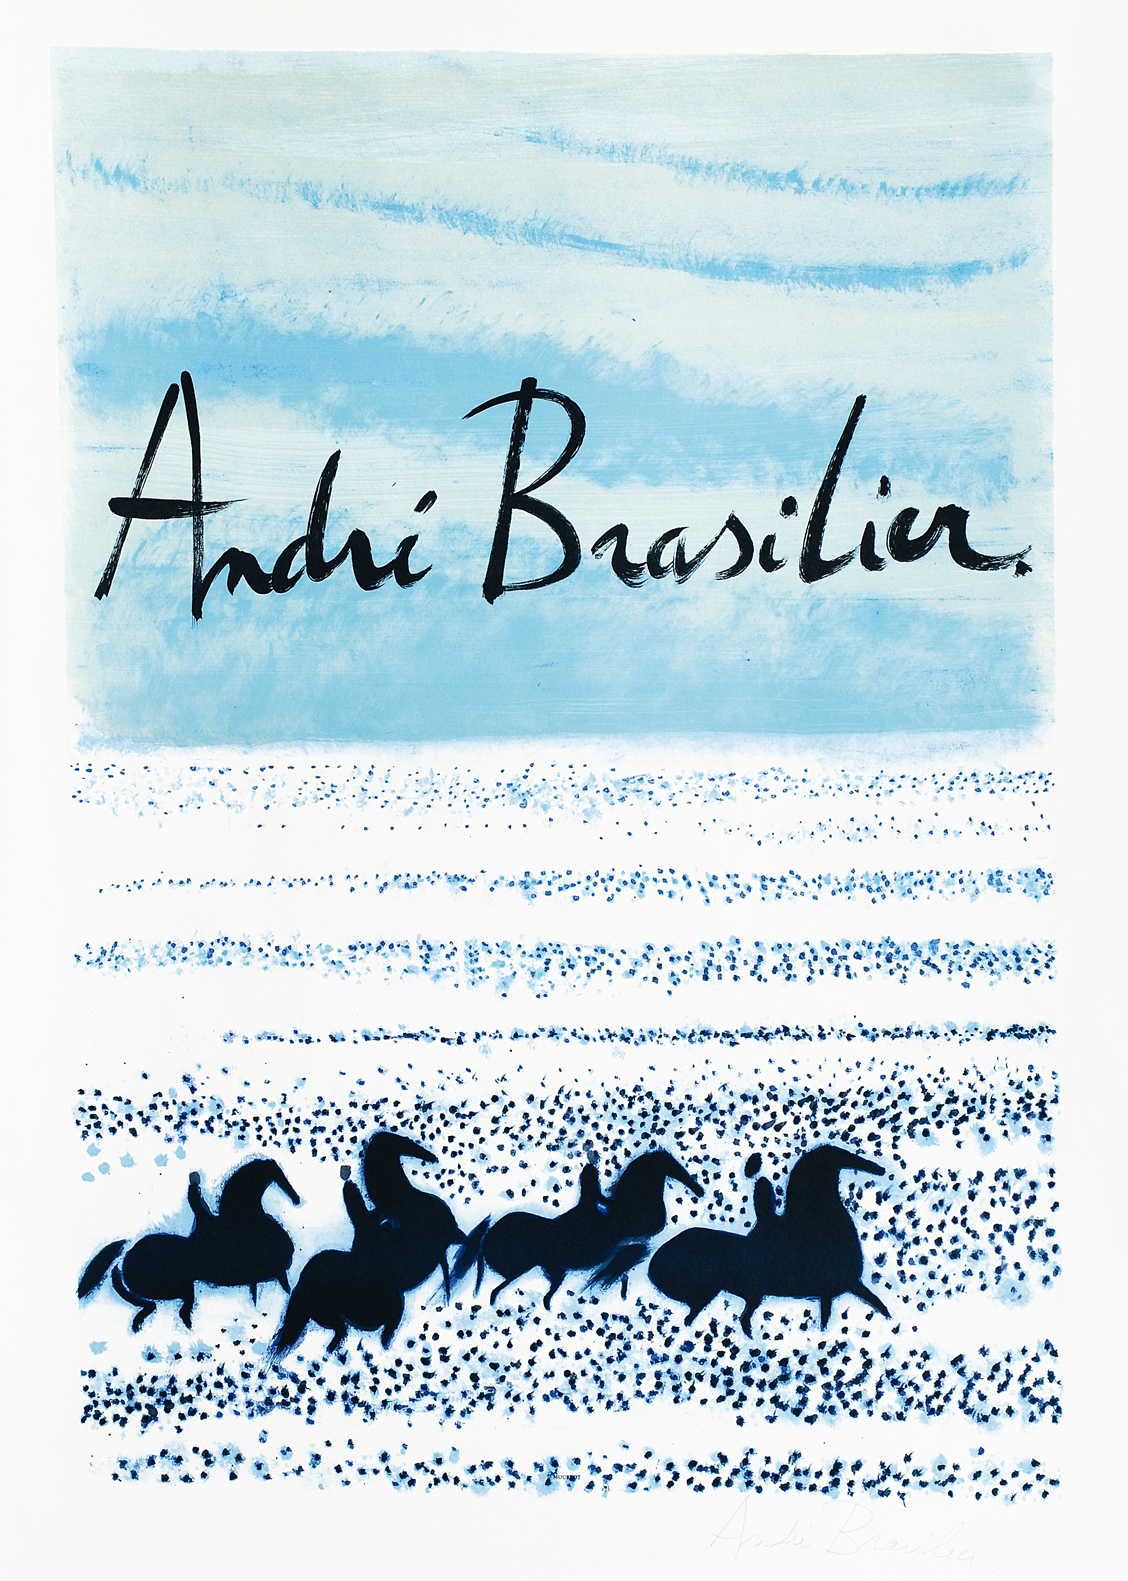 A hand-signed poster: a rider at the sea